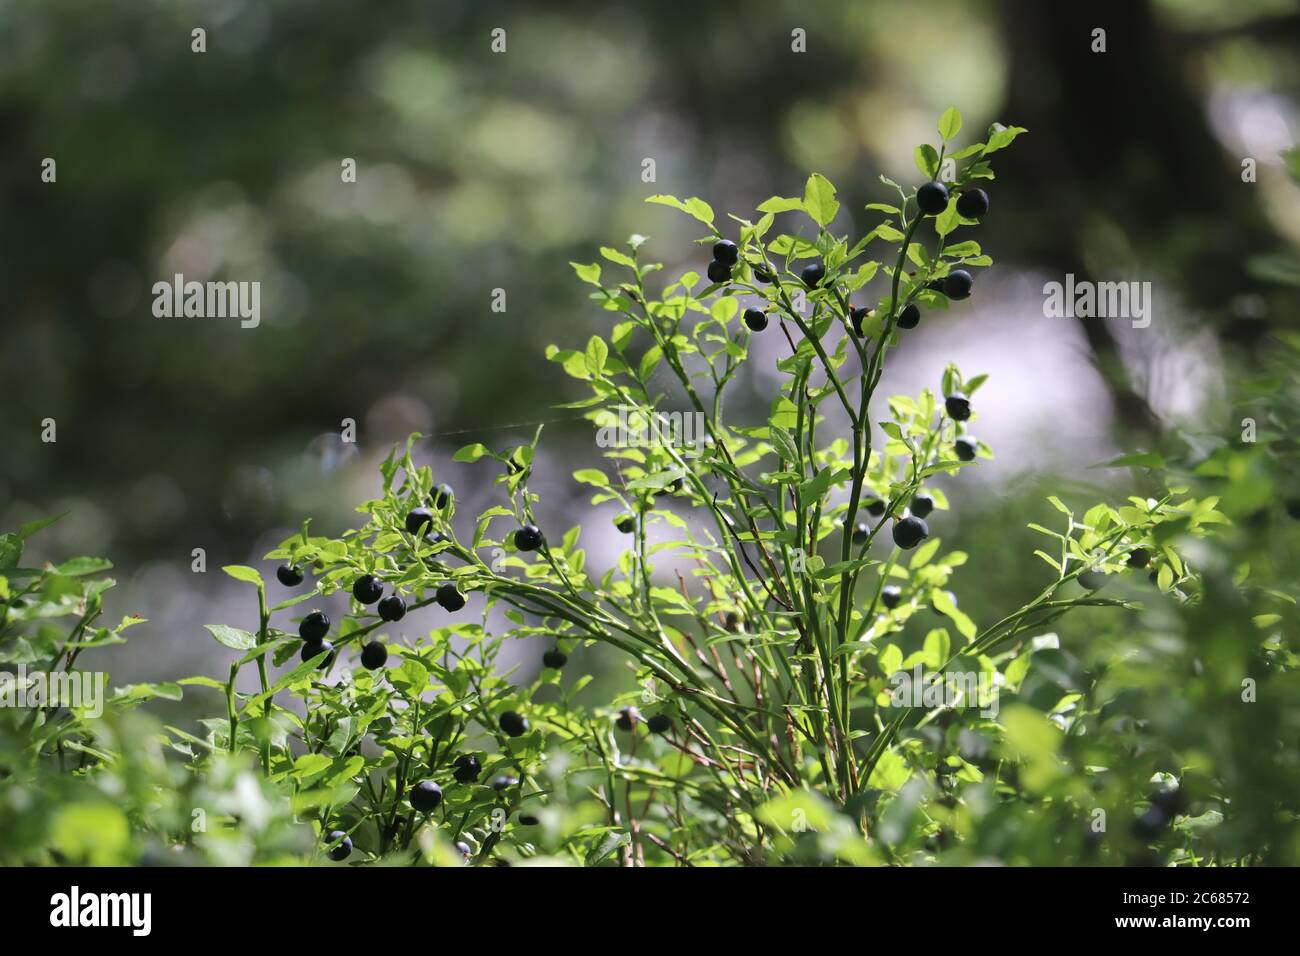 many wild berries attached to plant surrounded by green foliage  Stock Photo